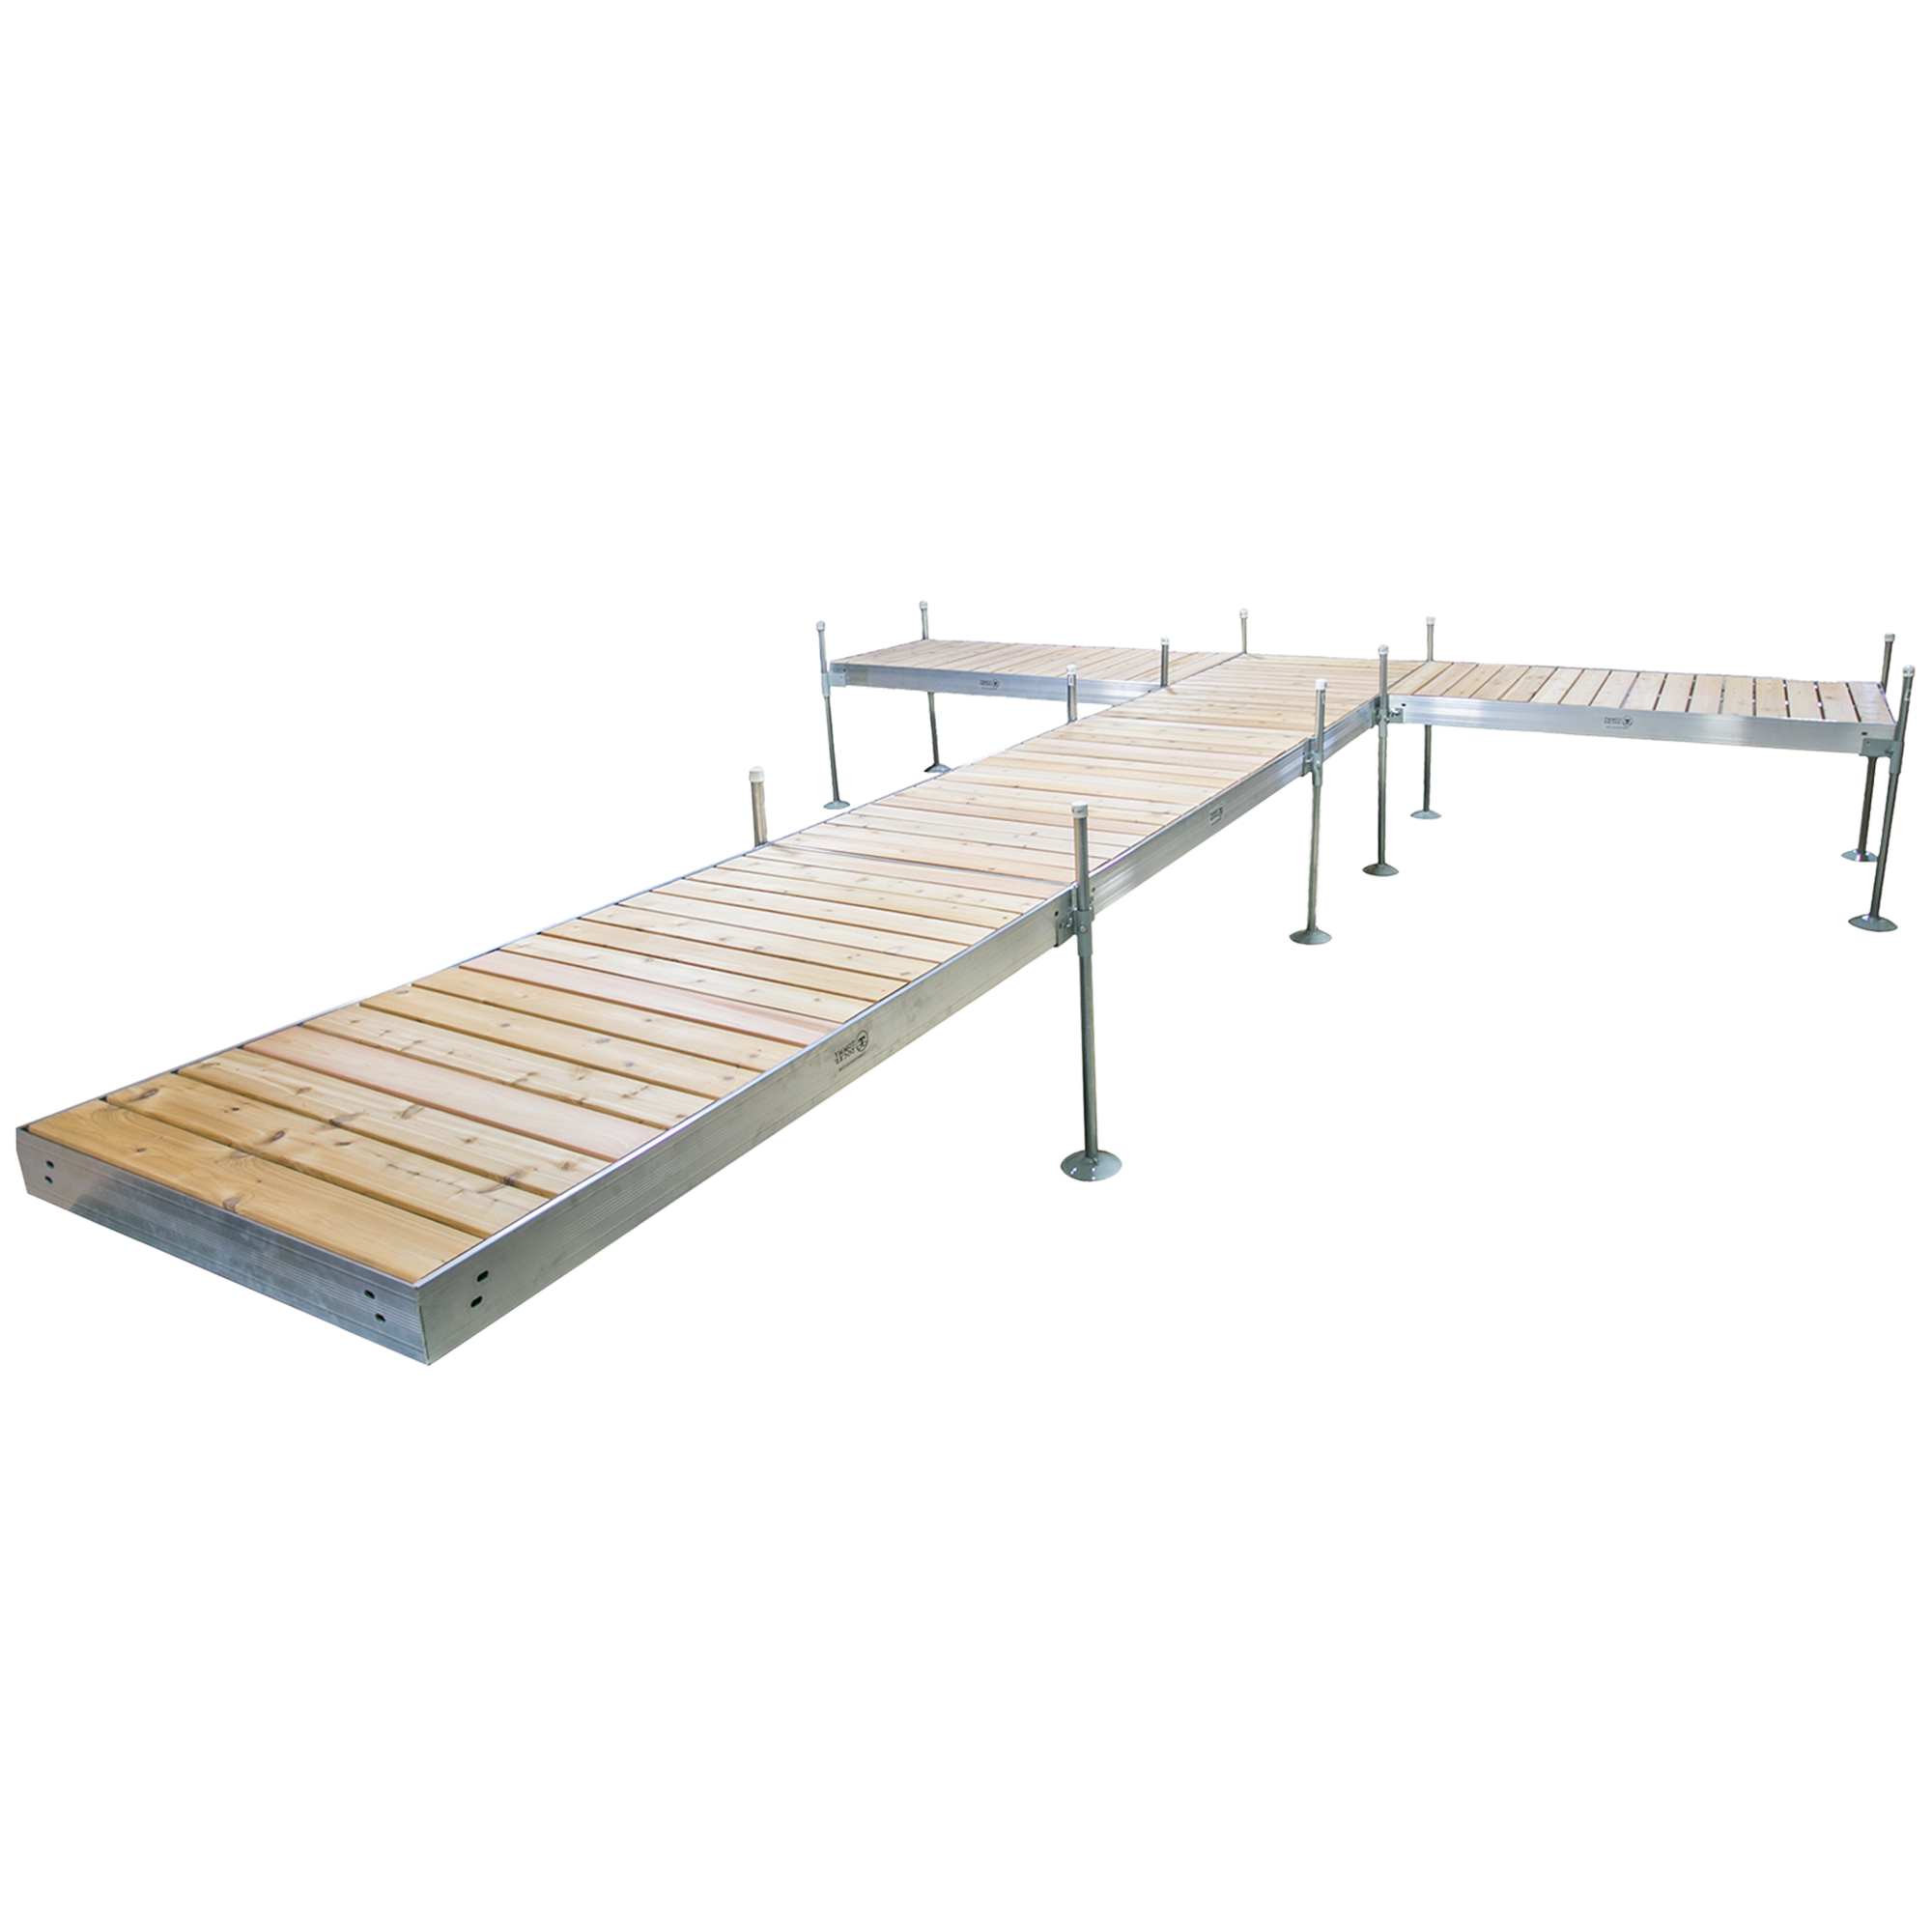 24' T-Shaped Boat Dock System with Aluminum Frame and Cedar Decking